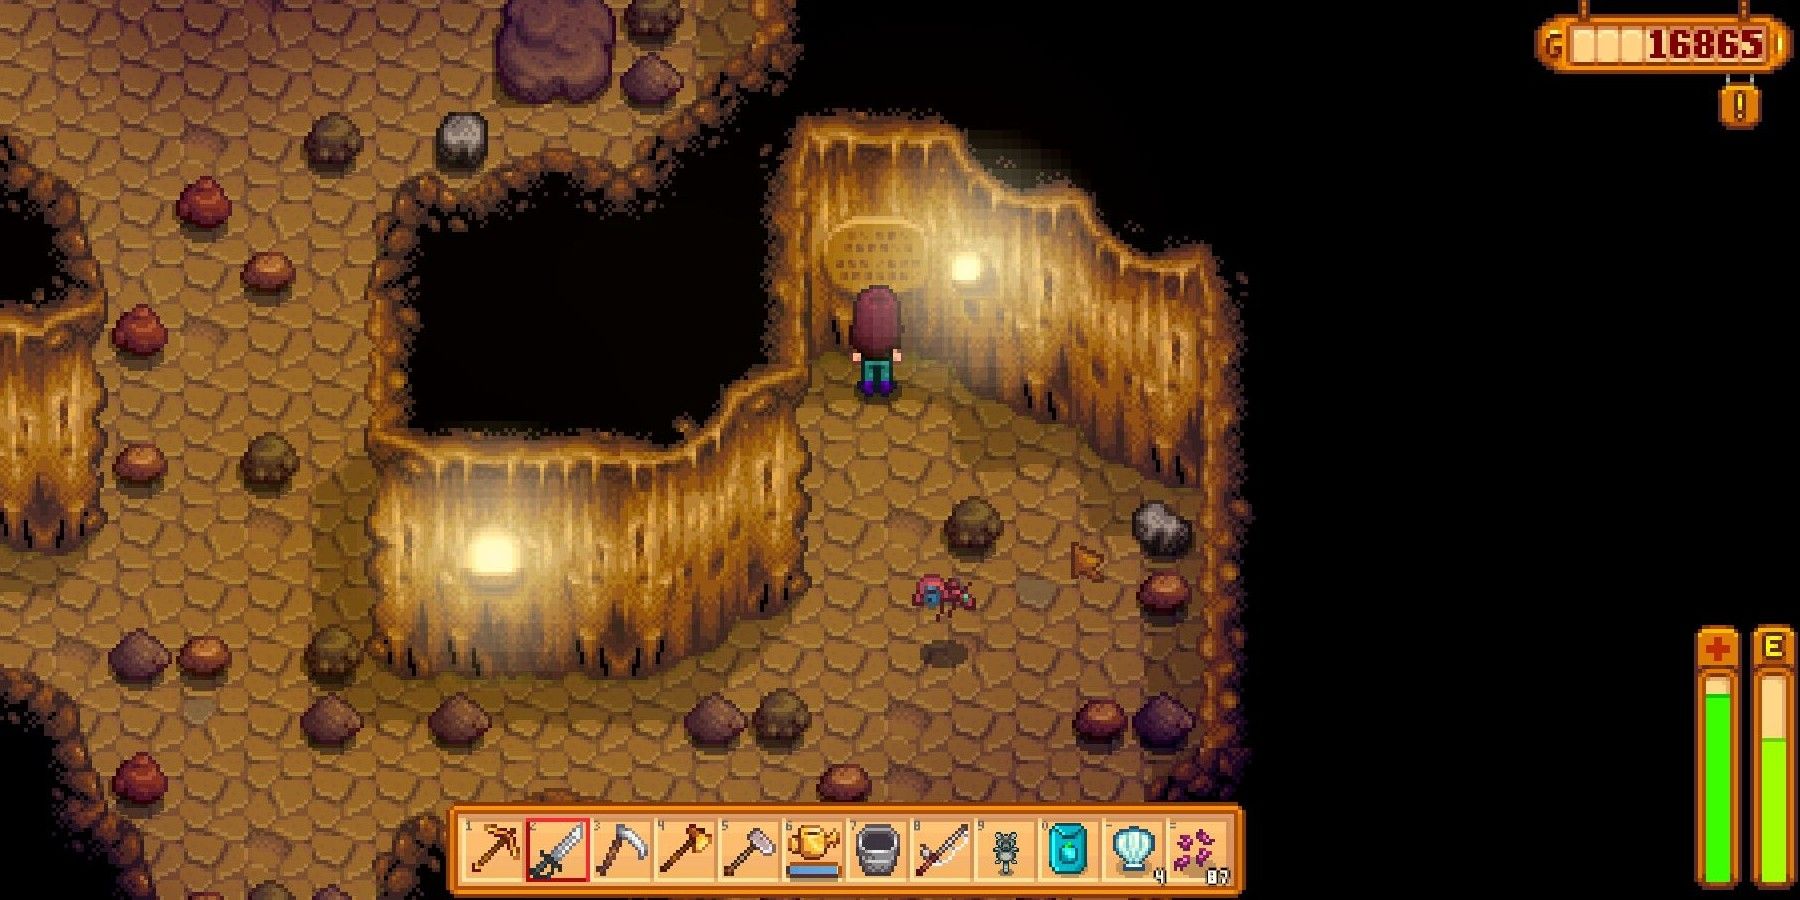 Stardew Valley Player Reaches Incredible Achievement in Skull Cavern